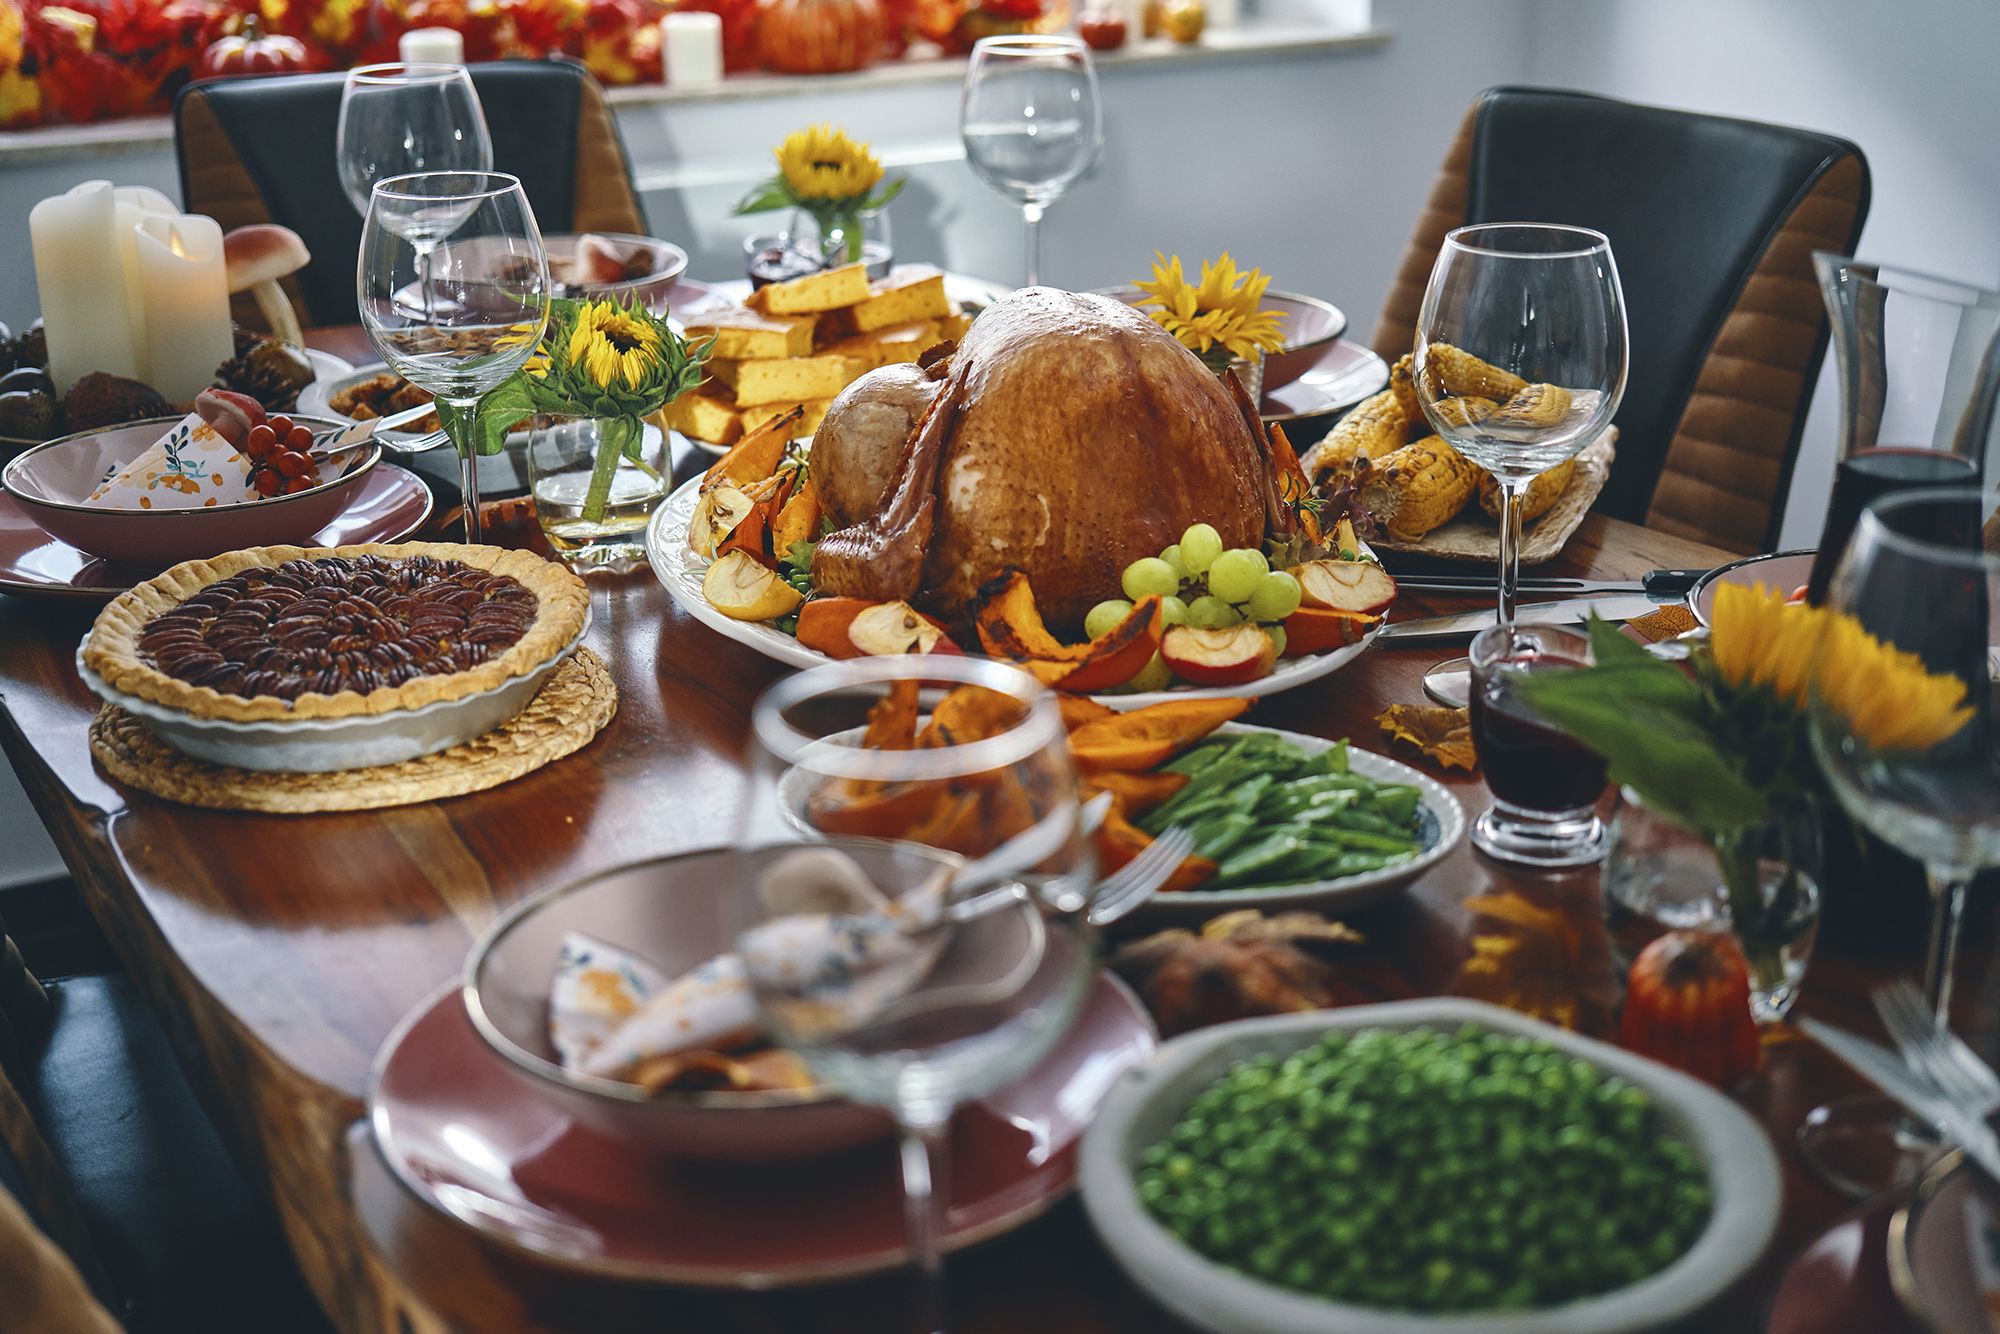 How Much a Thanksgiving Turkey Costs in Every State